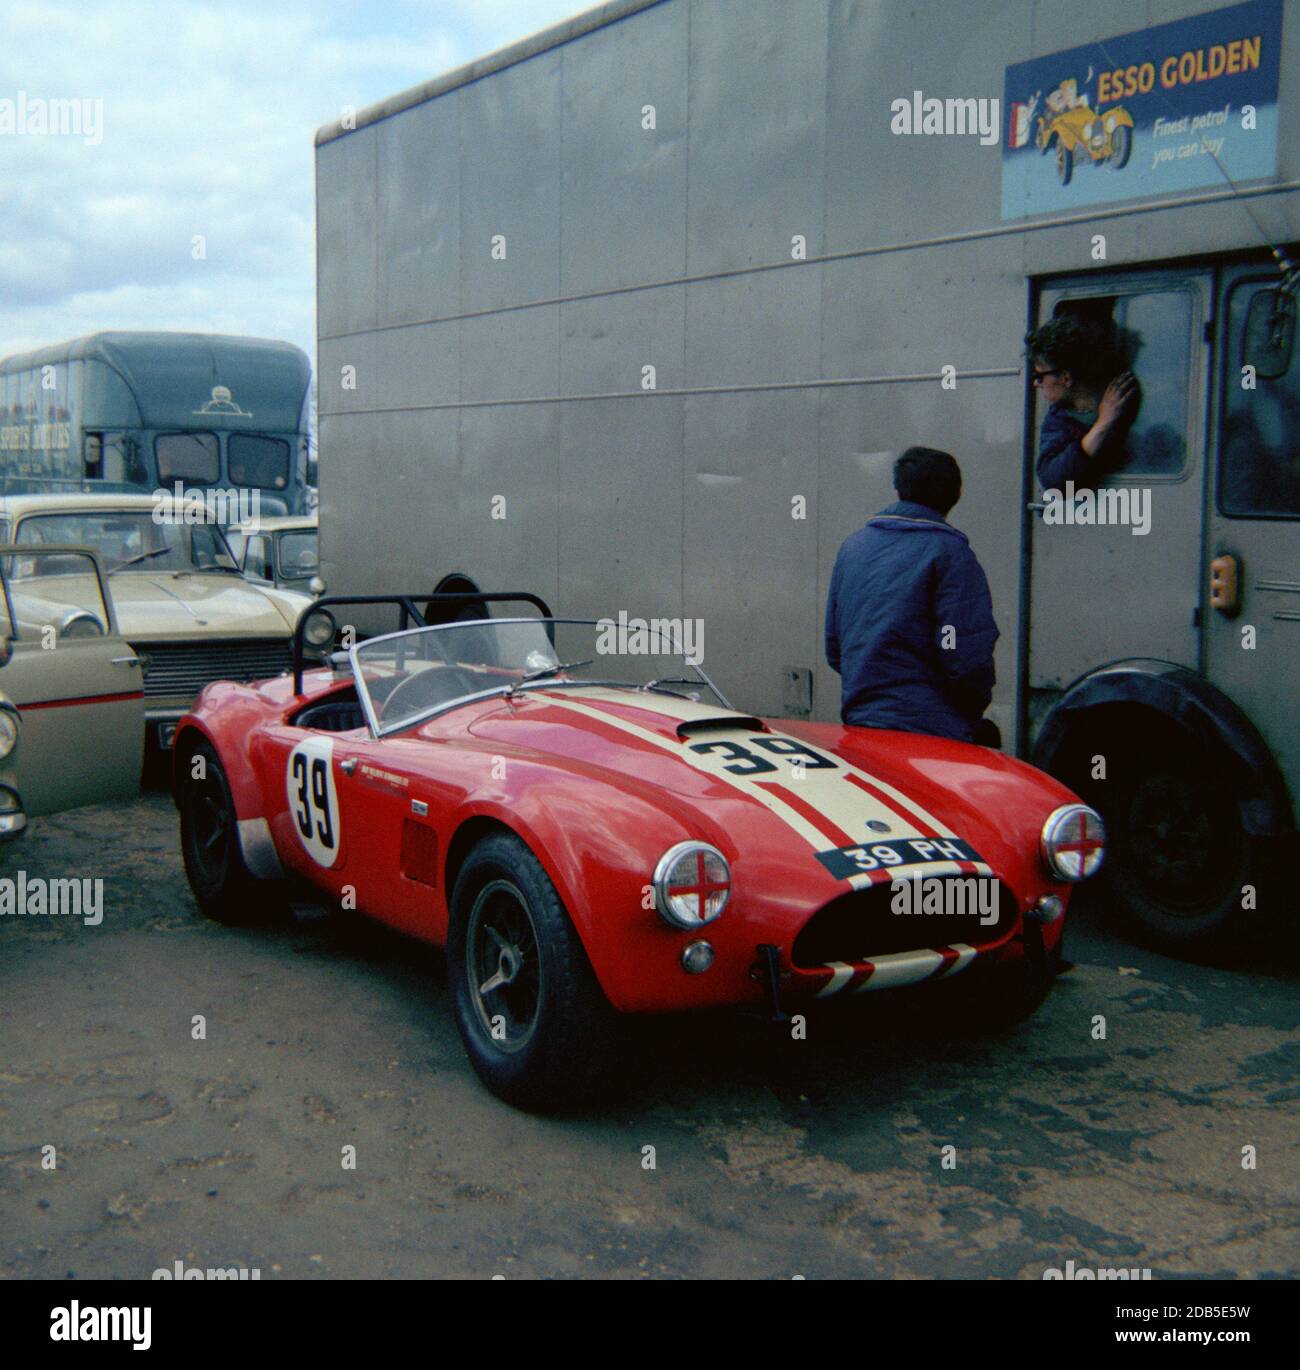 Jack Sears’ AC Cobra 289 and team mechanics awaiting paddock entry at Silverstone, Practise Day 1st May 1964. The 1963 Le Mans car which finished 7th Stock Photo